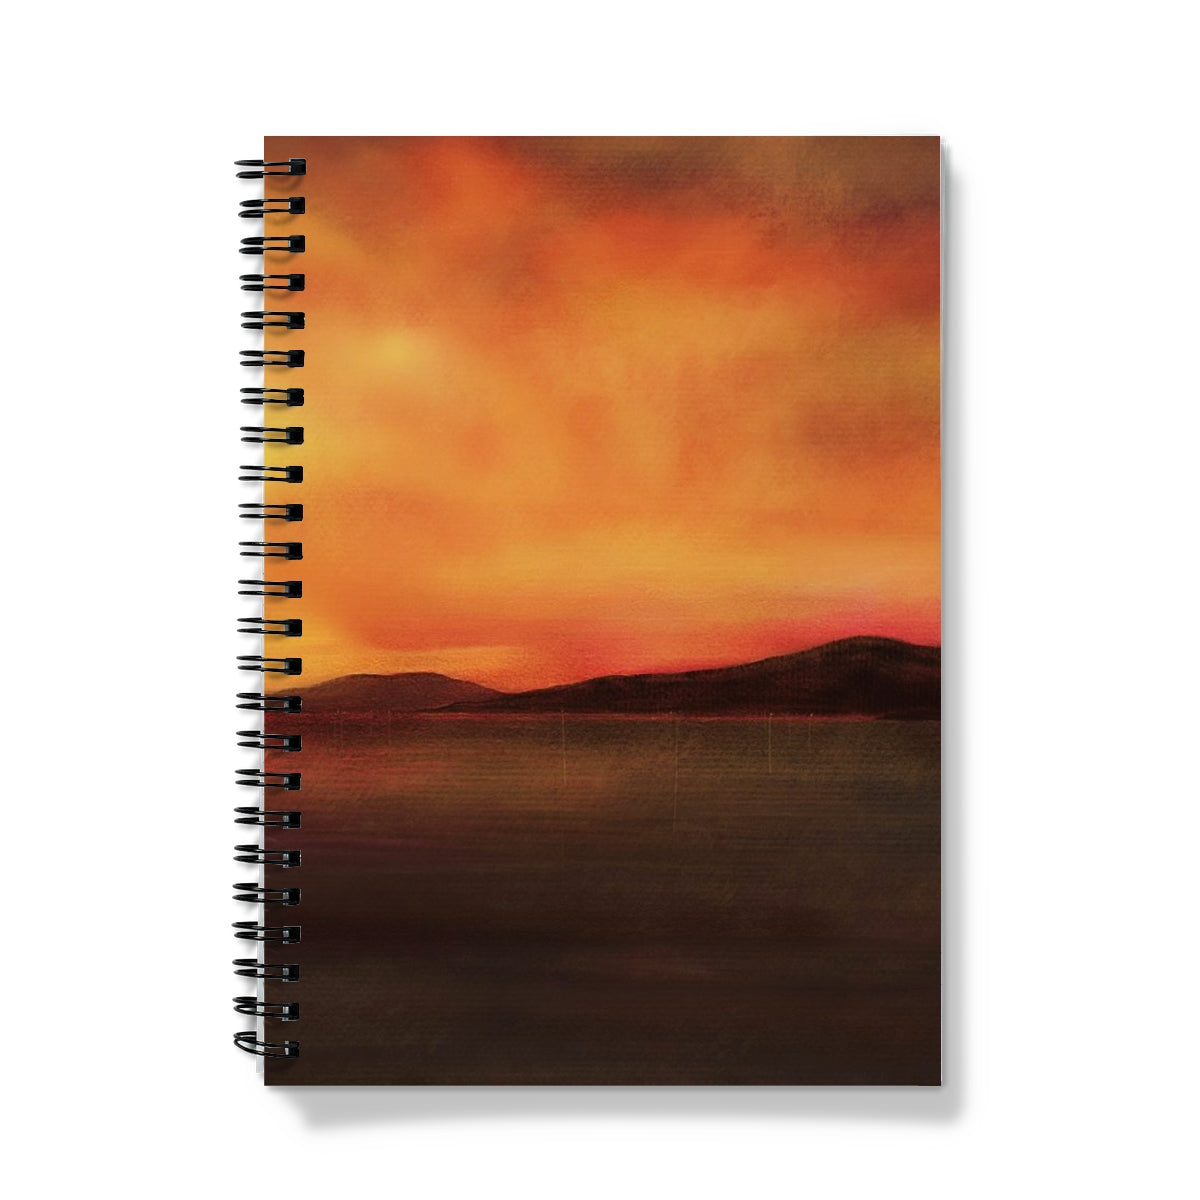 Harris Sunset Art Gifts Notebook-Journals & Notebooks-Hebridean Islands Art Gallery-A4-Lined-Paintings, Prints, Homeware, Art Gifts From Scotland By Scottish Artist Kevin Hunter